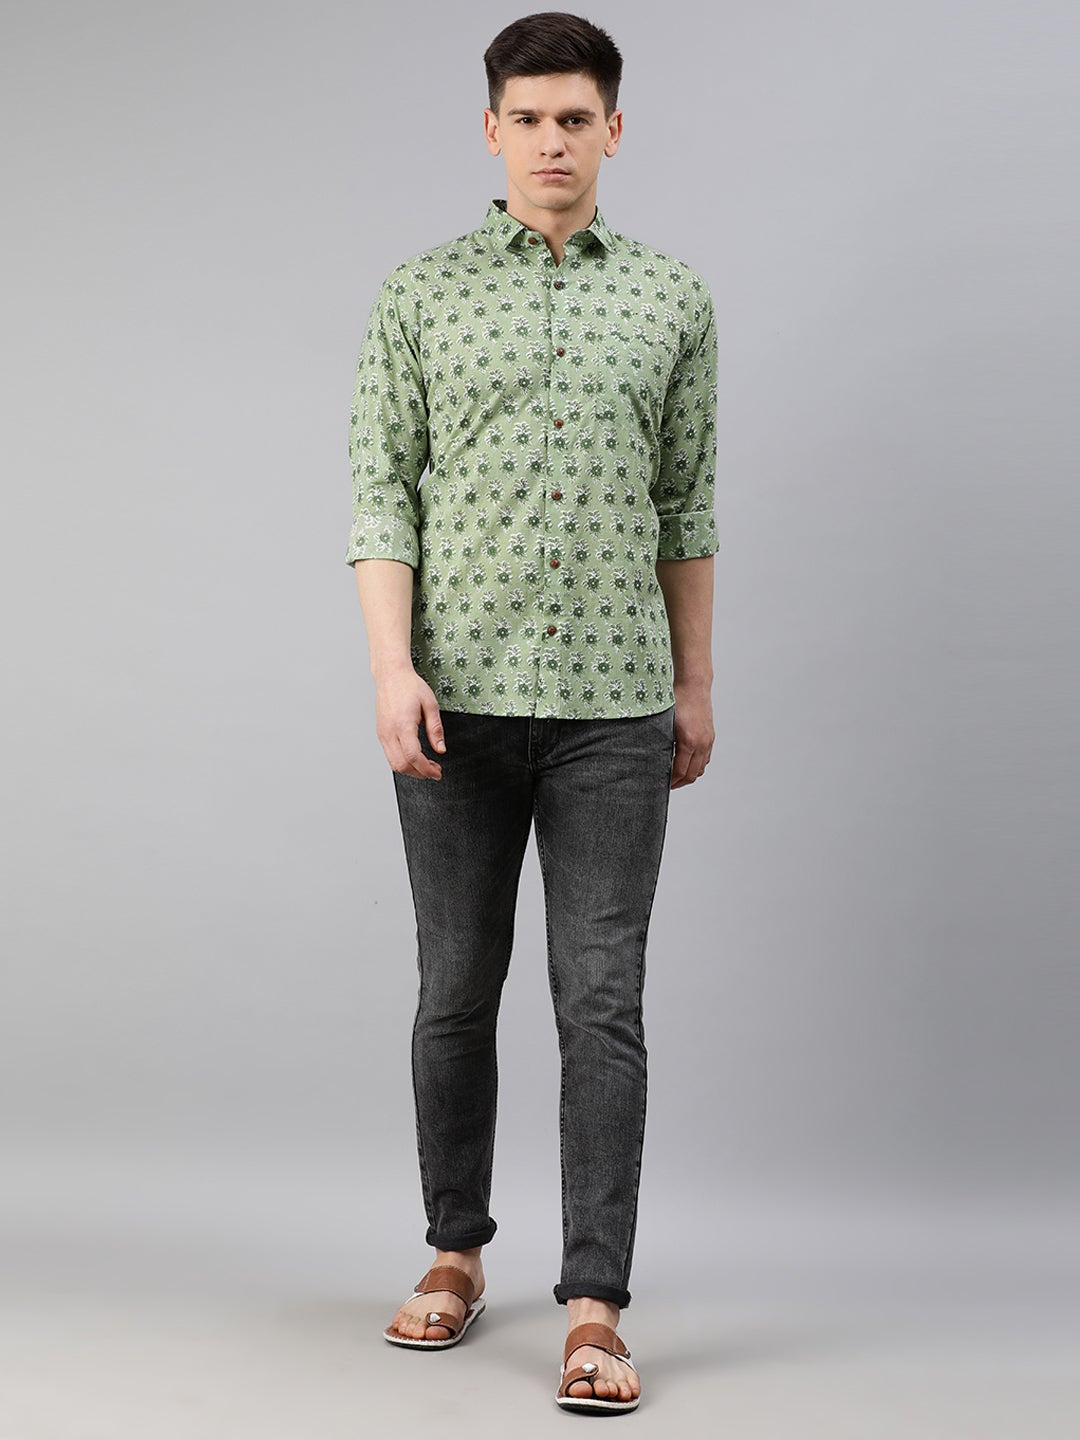 Green Cotton Full Sleeves Shirts For Men